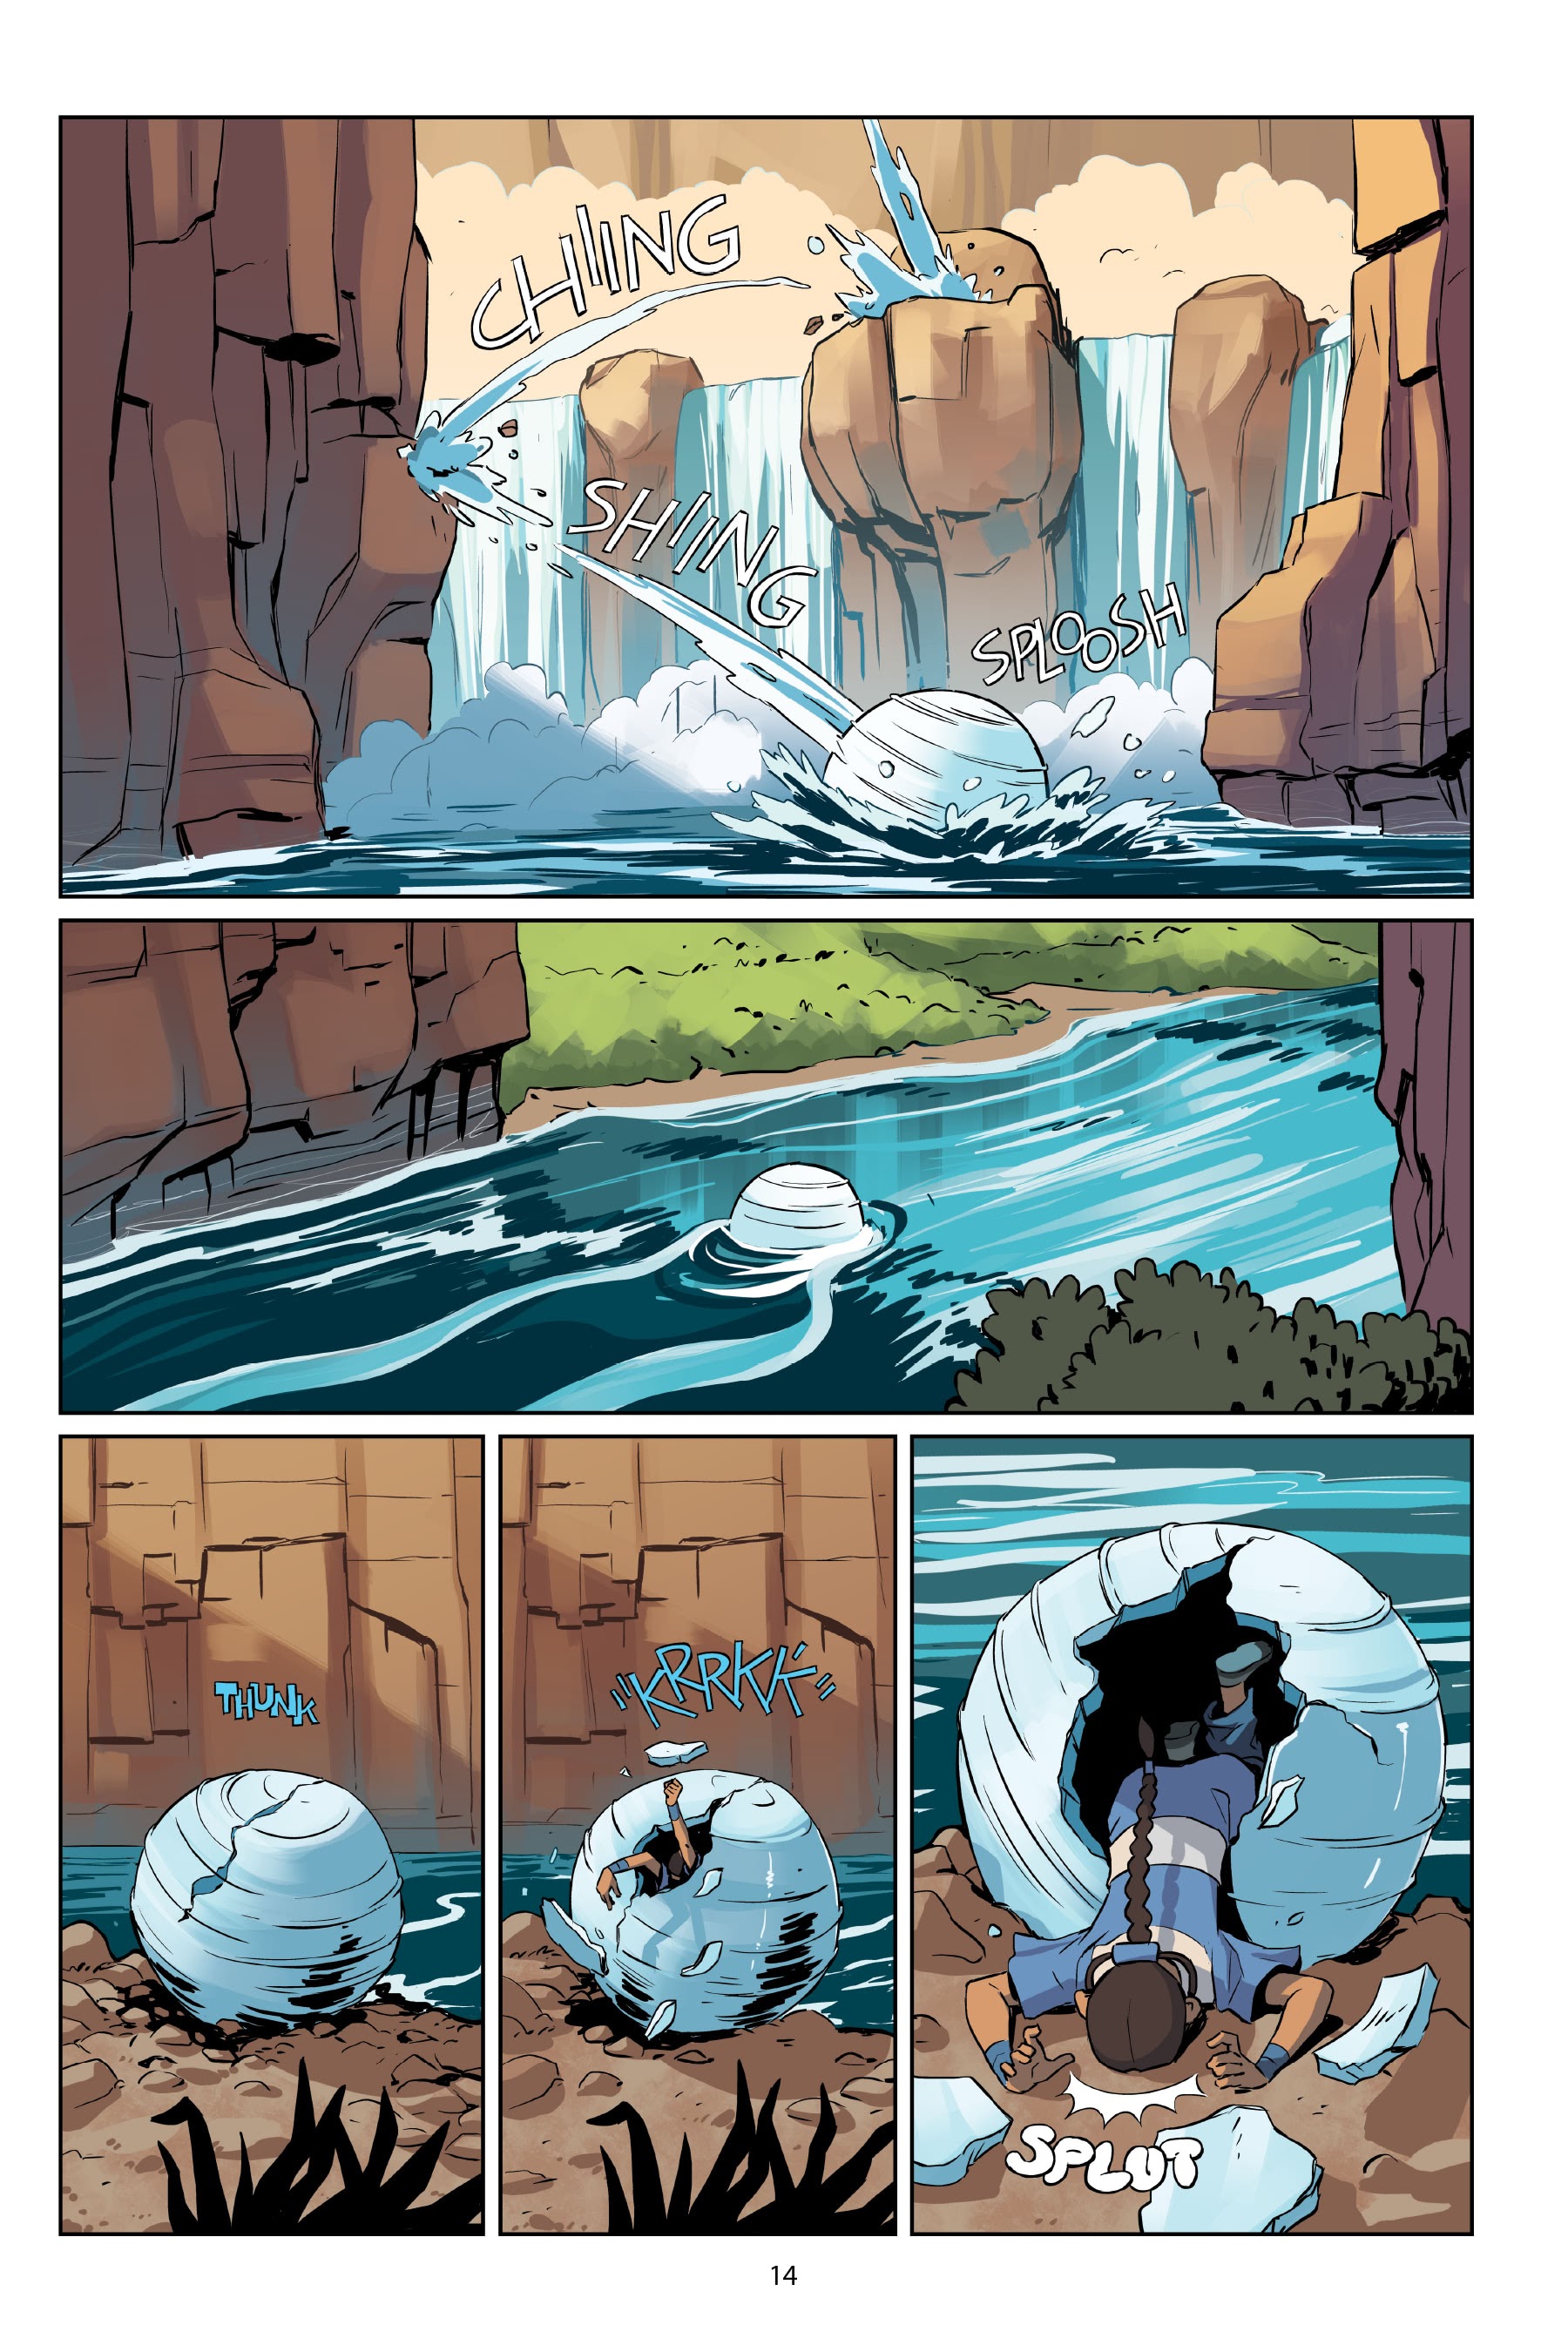 Read online Avatar: The Last Airbender—Katara and the Pirate's Silver comic -  Issue # TPB - 15